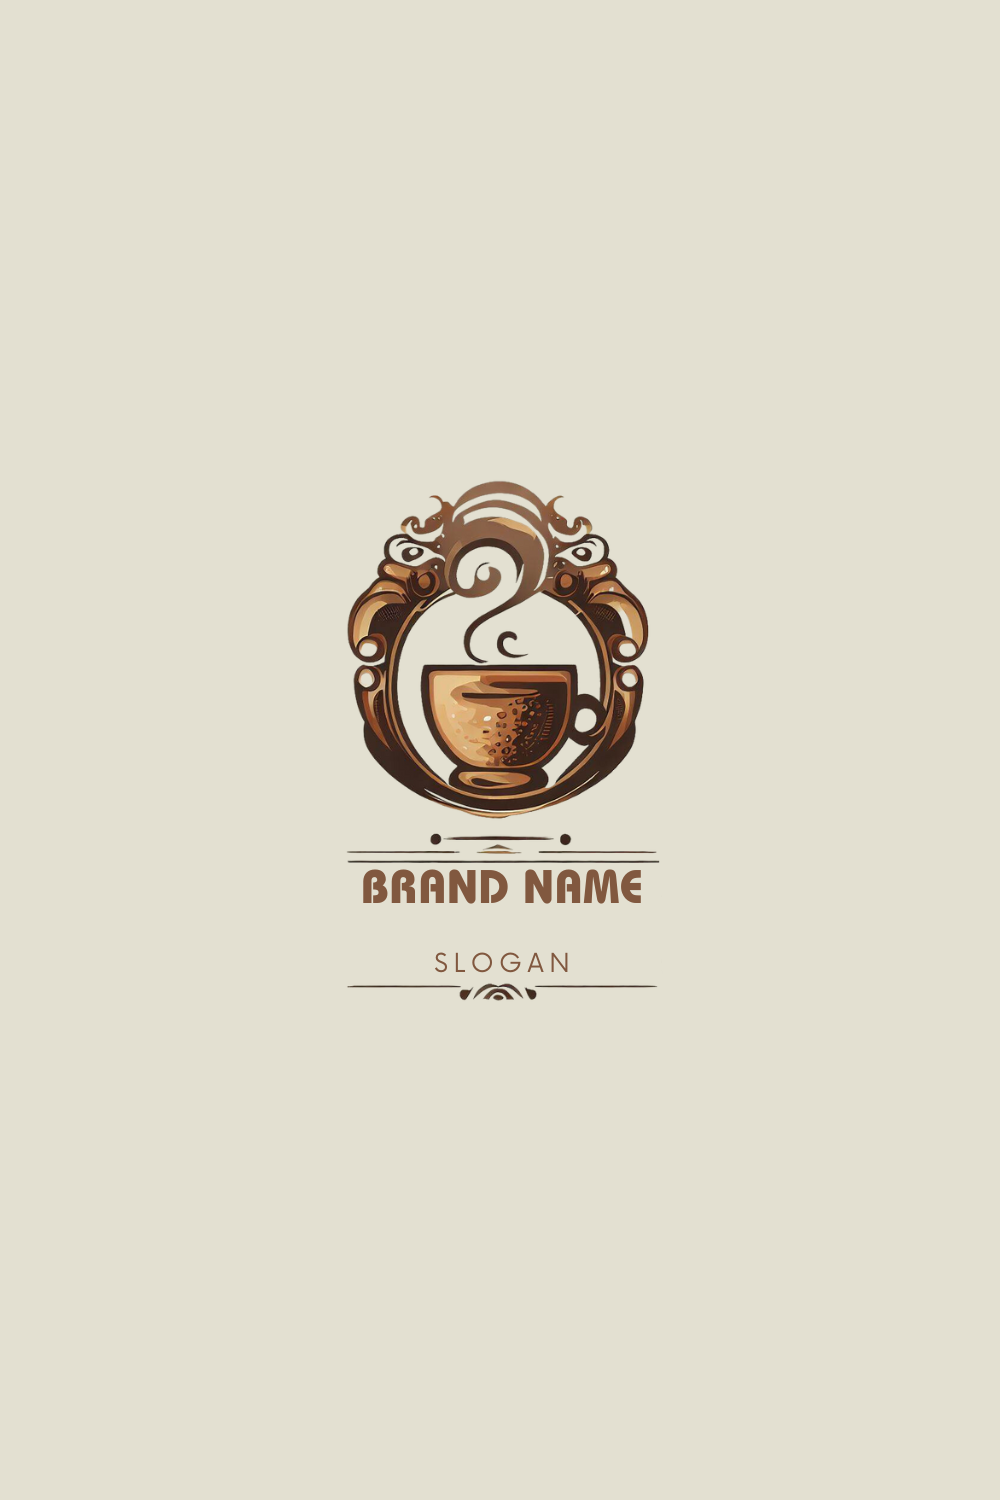 Aesthetic Coffee logo pinterest preview image.